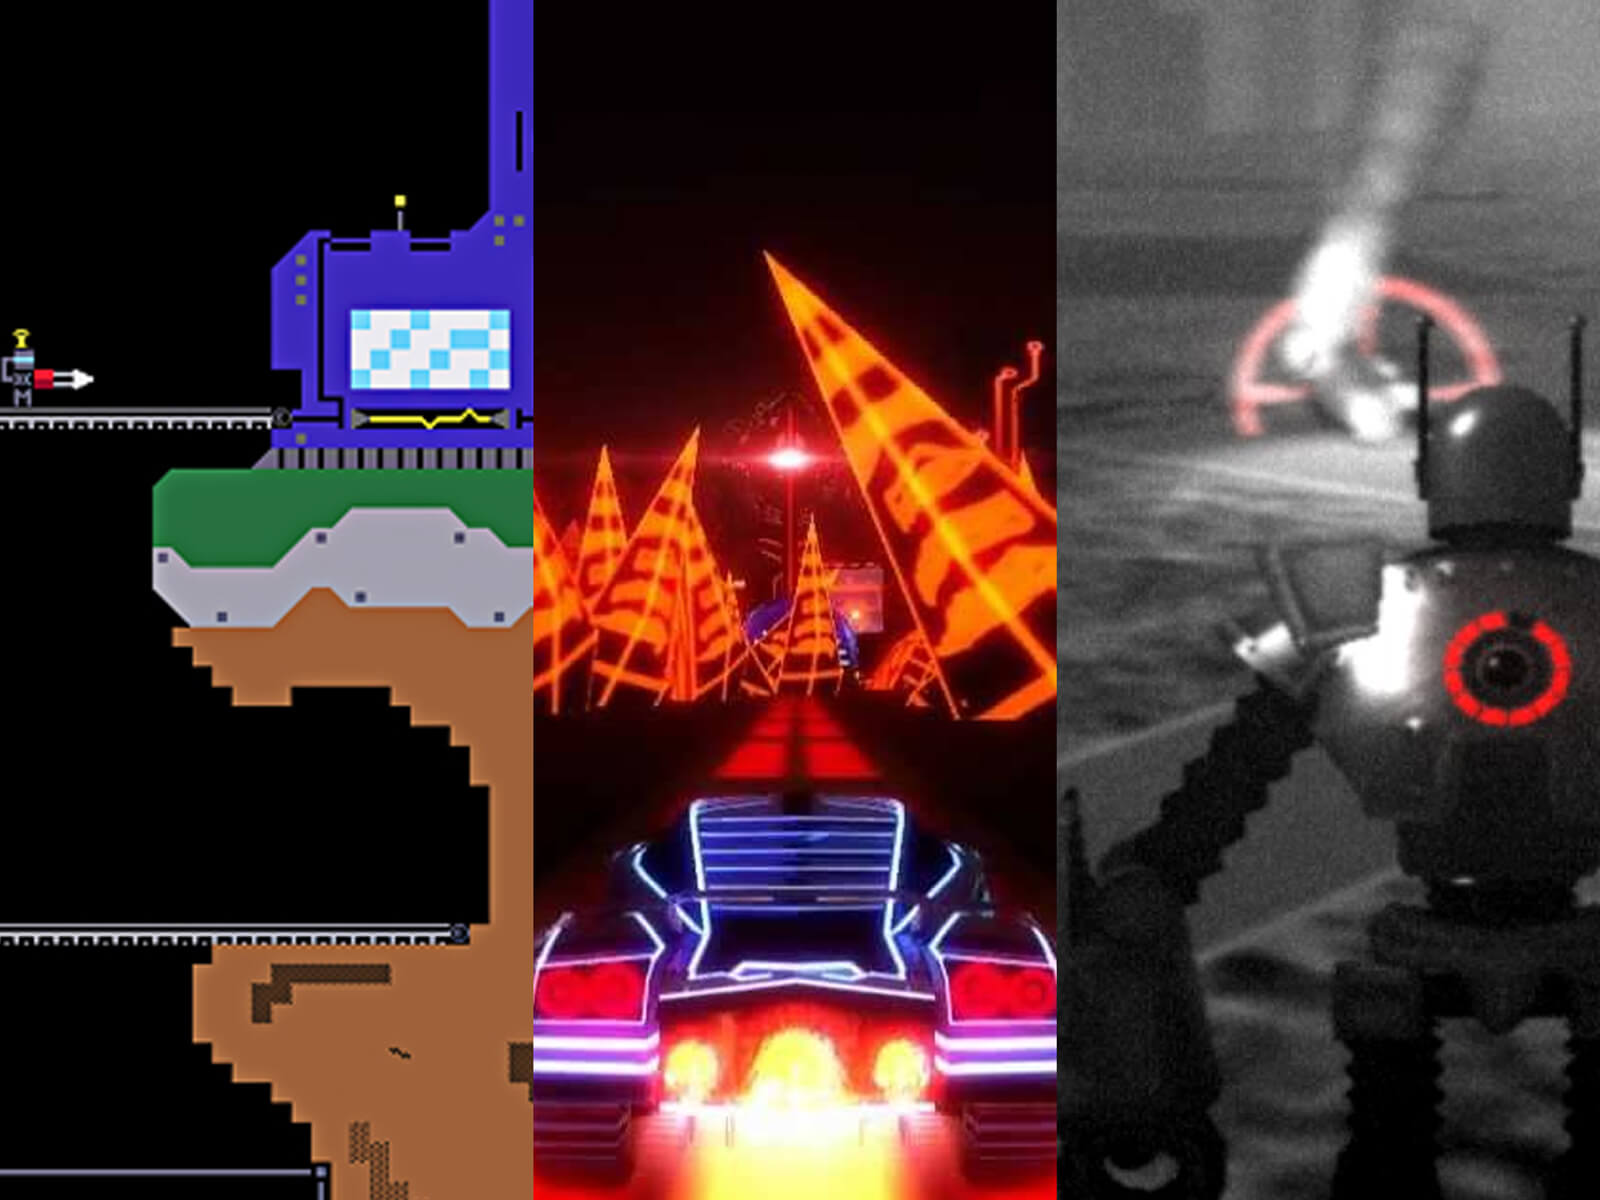 A mashup of screenshots from seven DigiPen games depicting a raindrop creature, a neon race car, a chained man, and more.